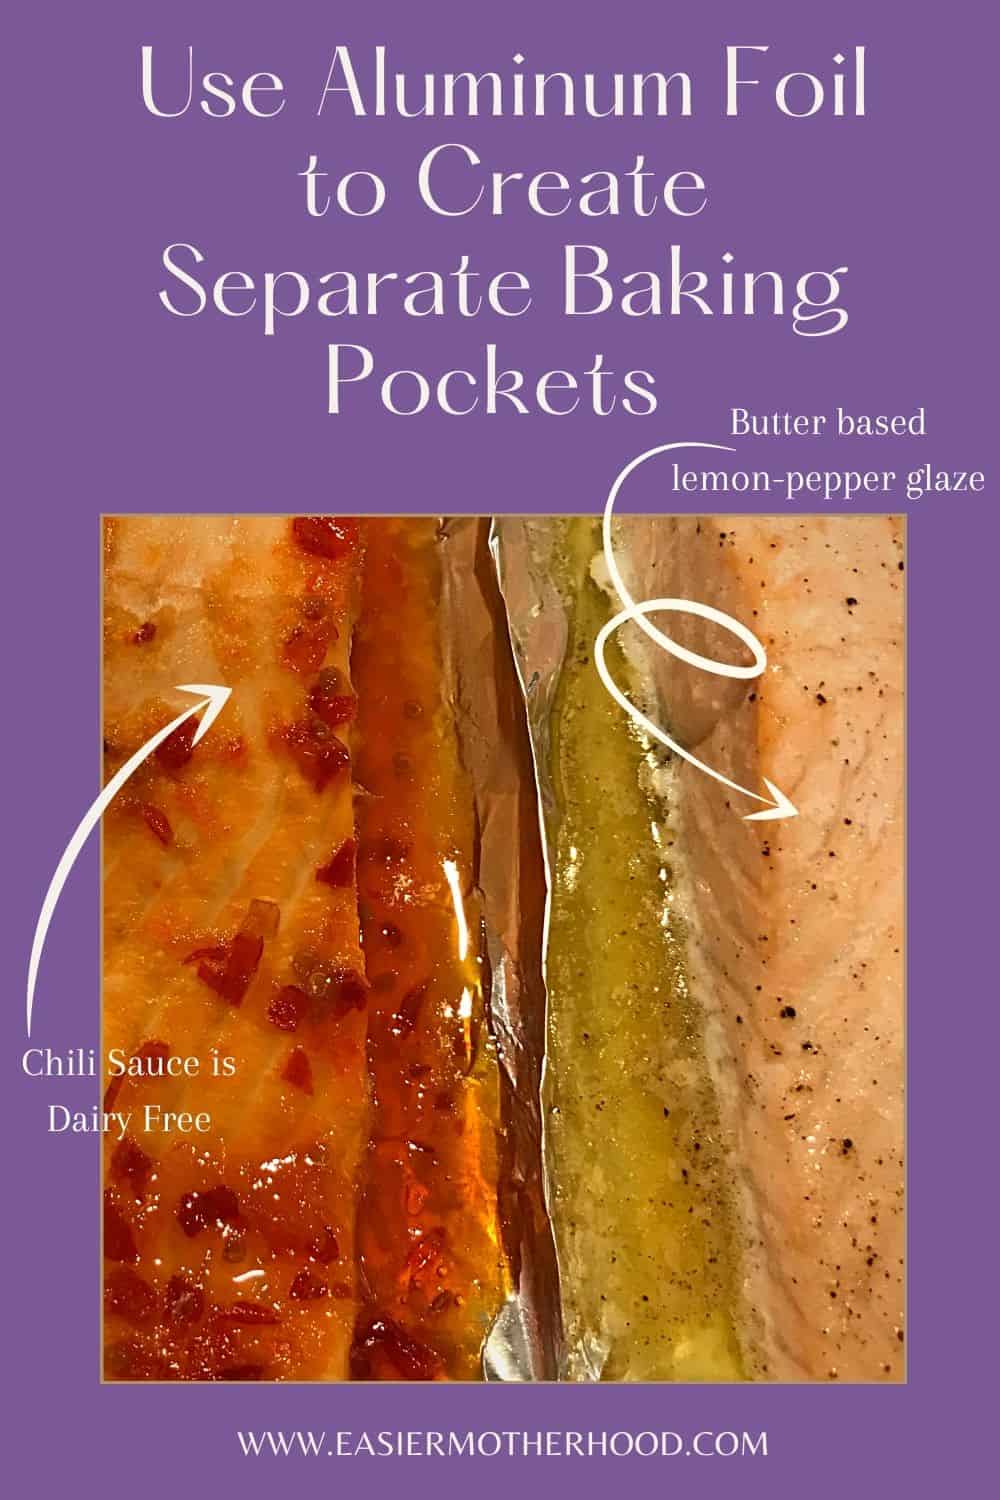 Pin illustrating the use of aluminum foil to create separate pockets to bake salmon with different glazes on the same pan